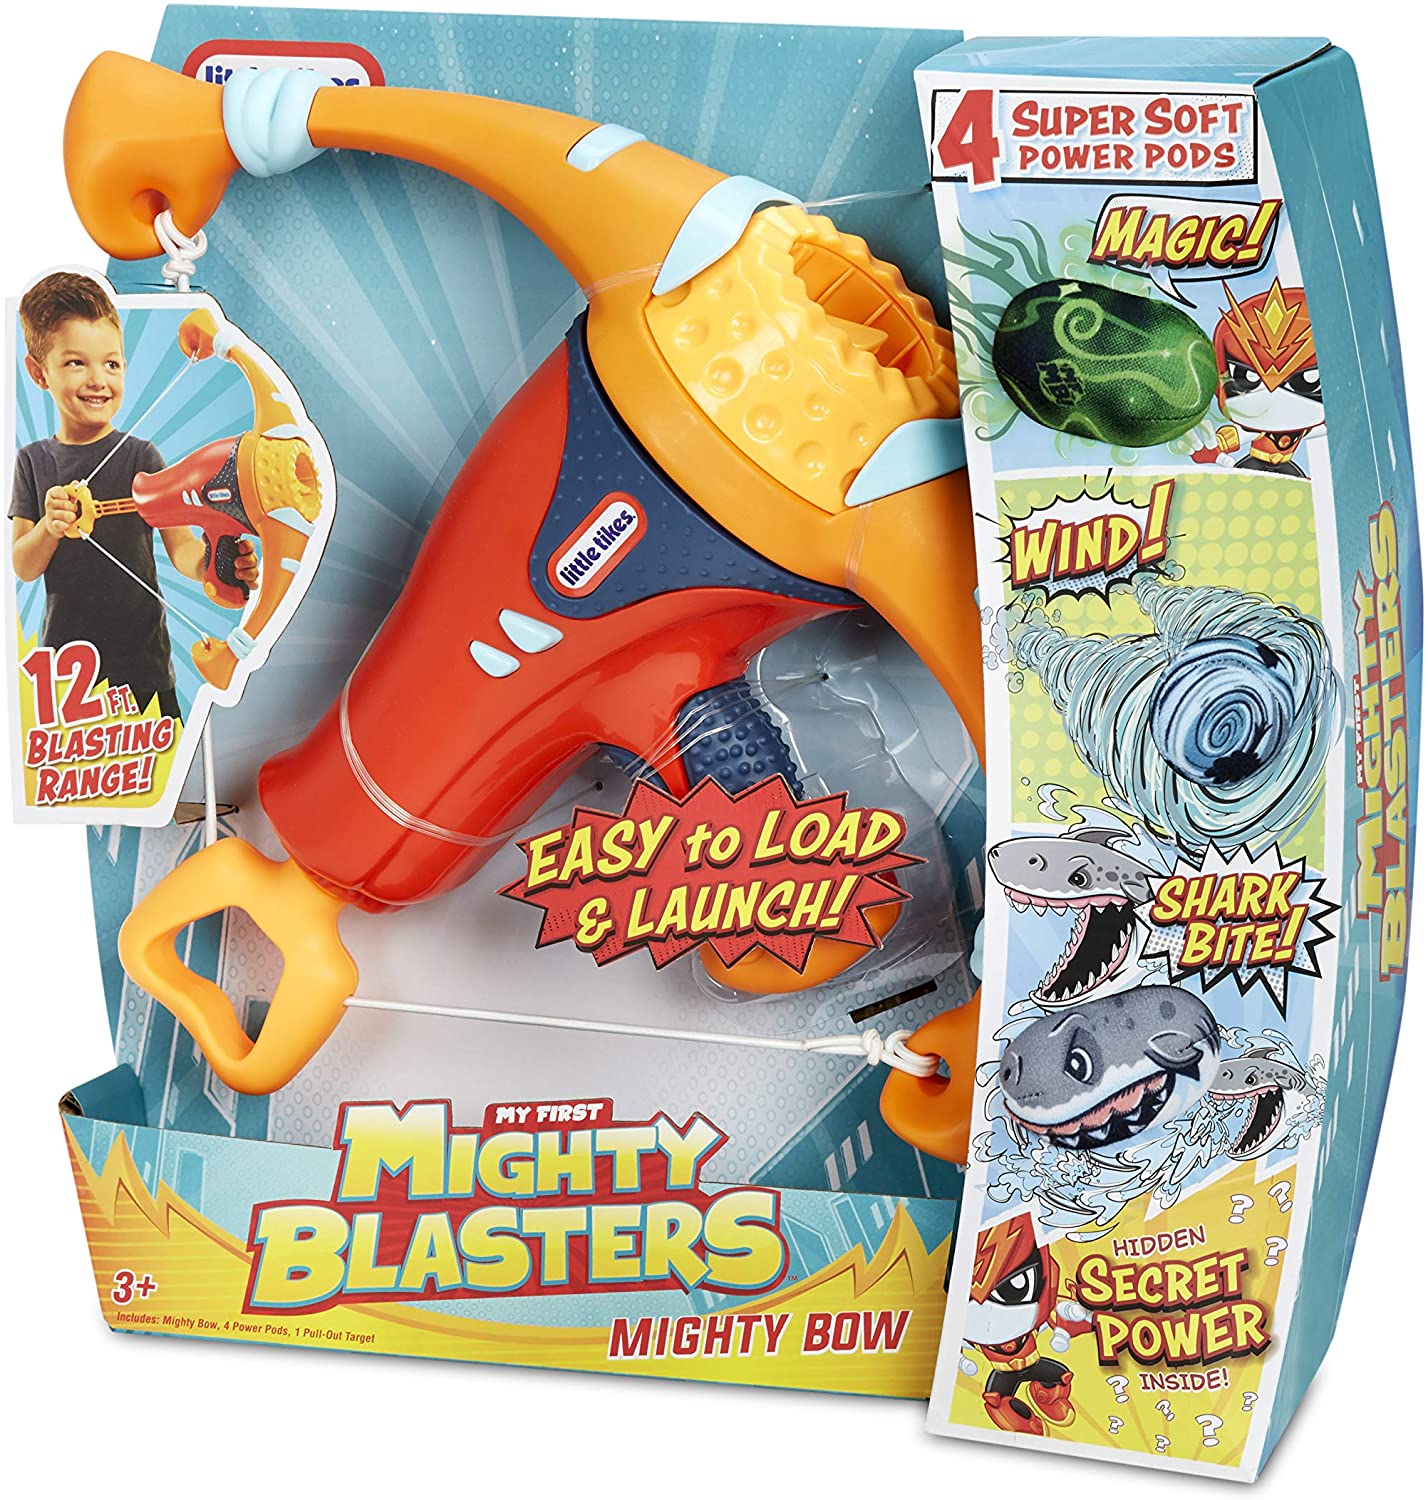 Little Tikes My First Mighty Blasters Might